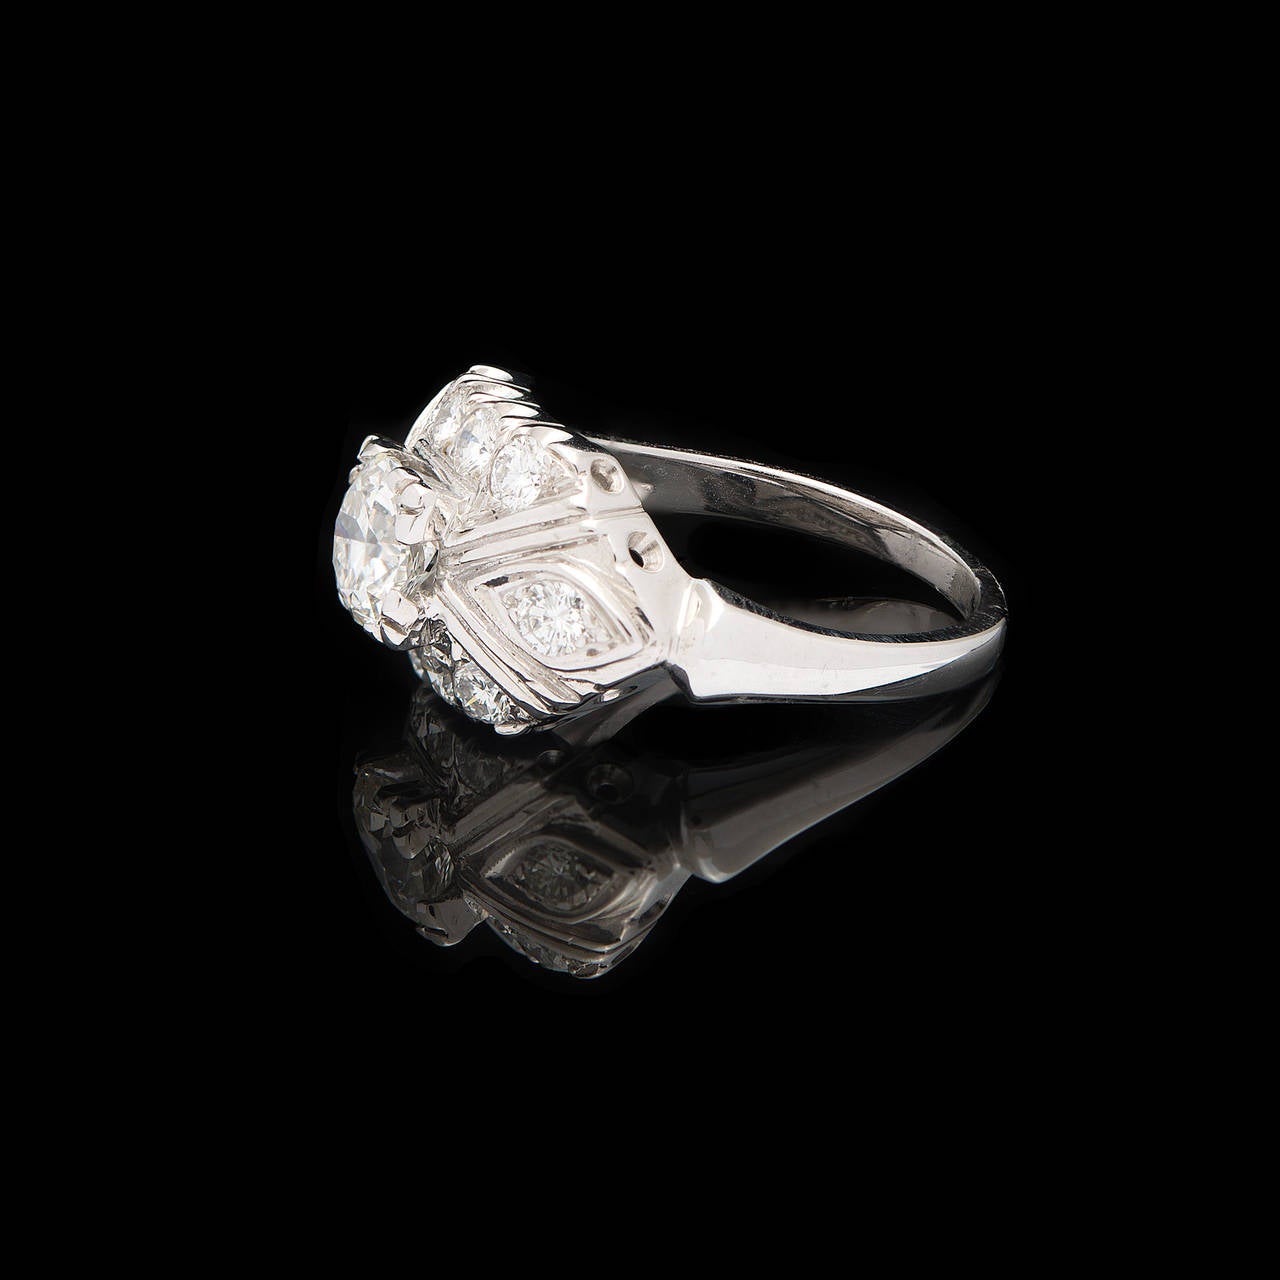 0.74 Carat Old European Cut Diamond Gold Ring In Good Condition For Sale In San Francisco, CA